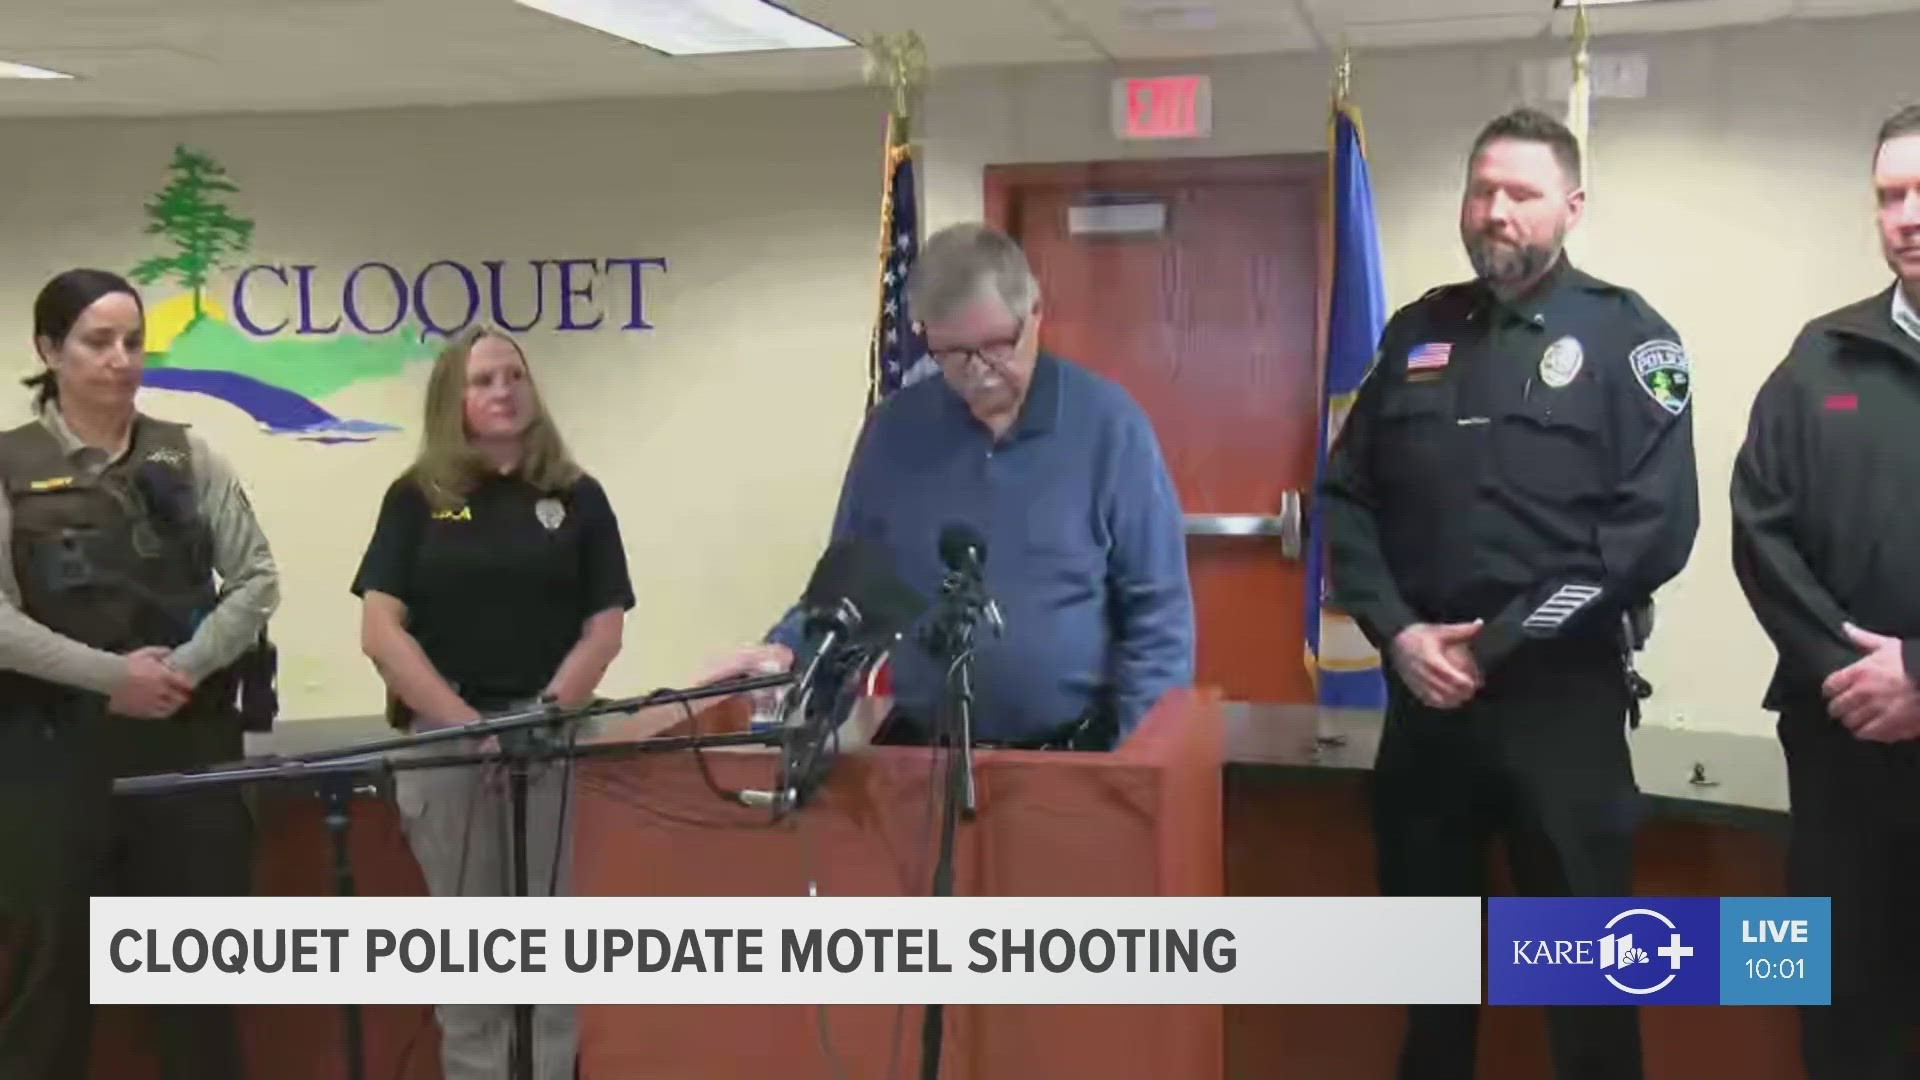 Police in Cloquet offered new details in a shooting incident at the Super 8 Motel Monday night that left three dead, including the suspected shooter.